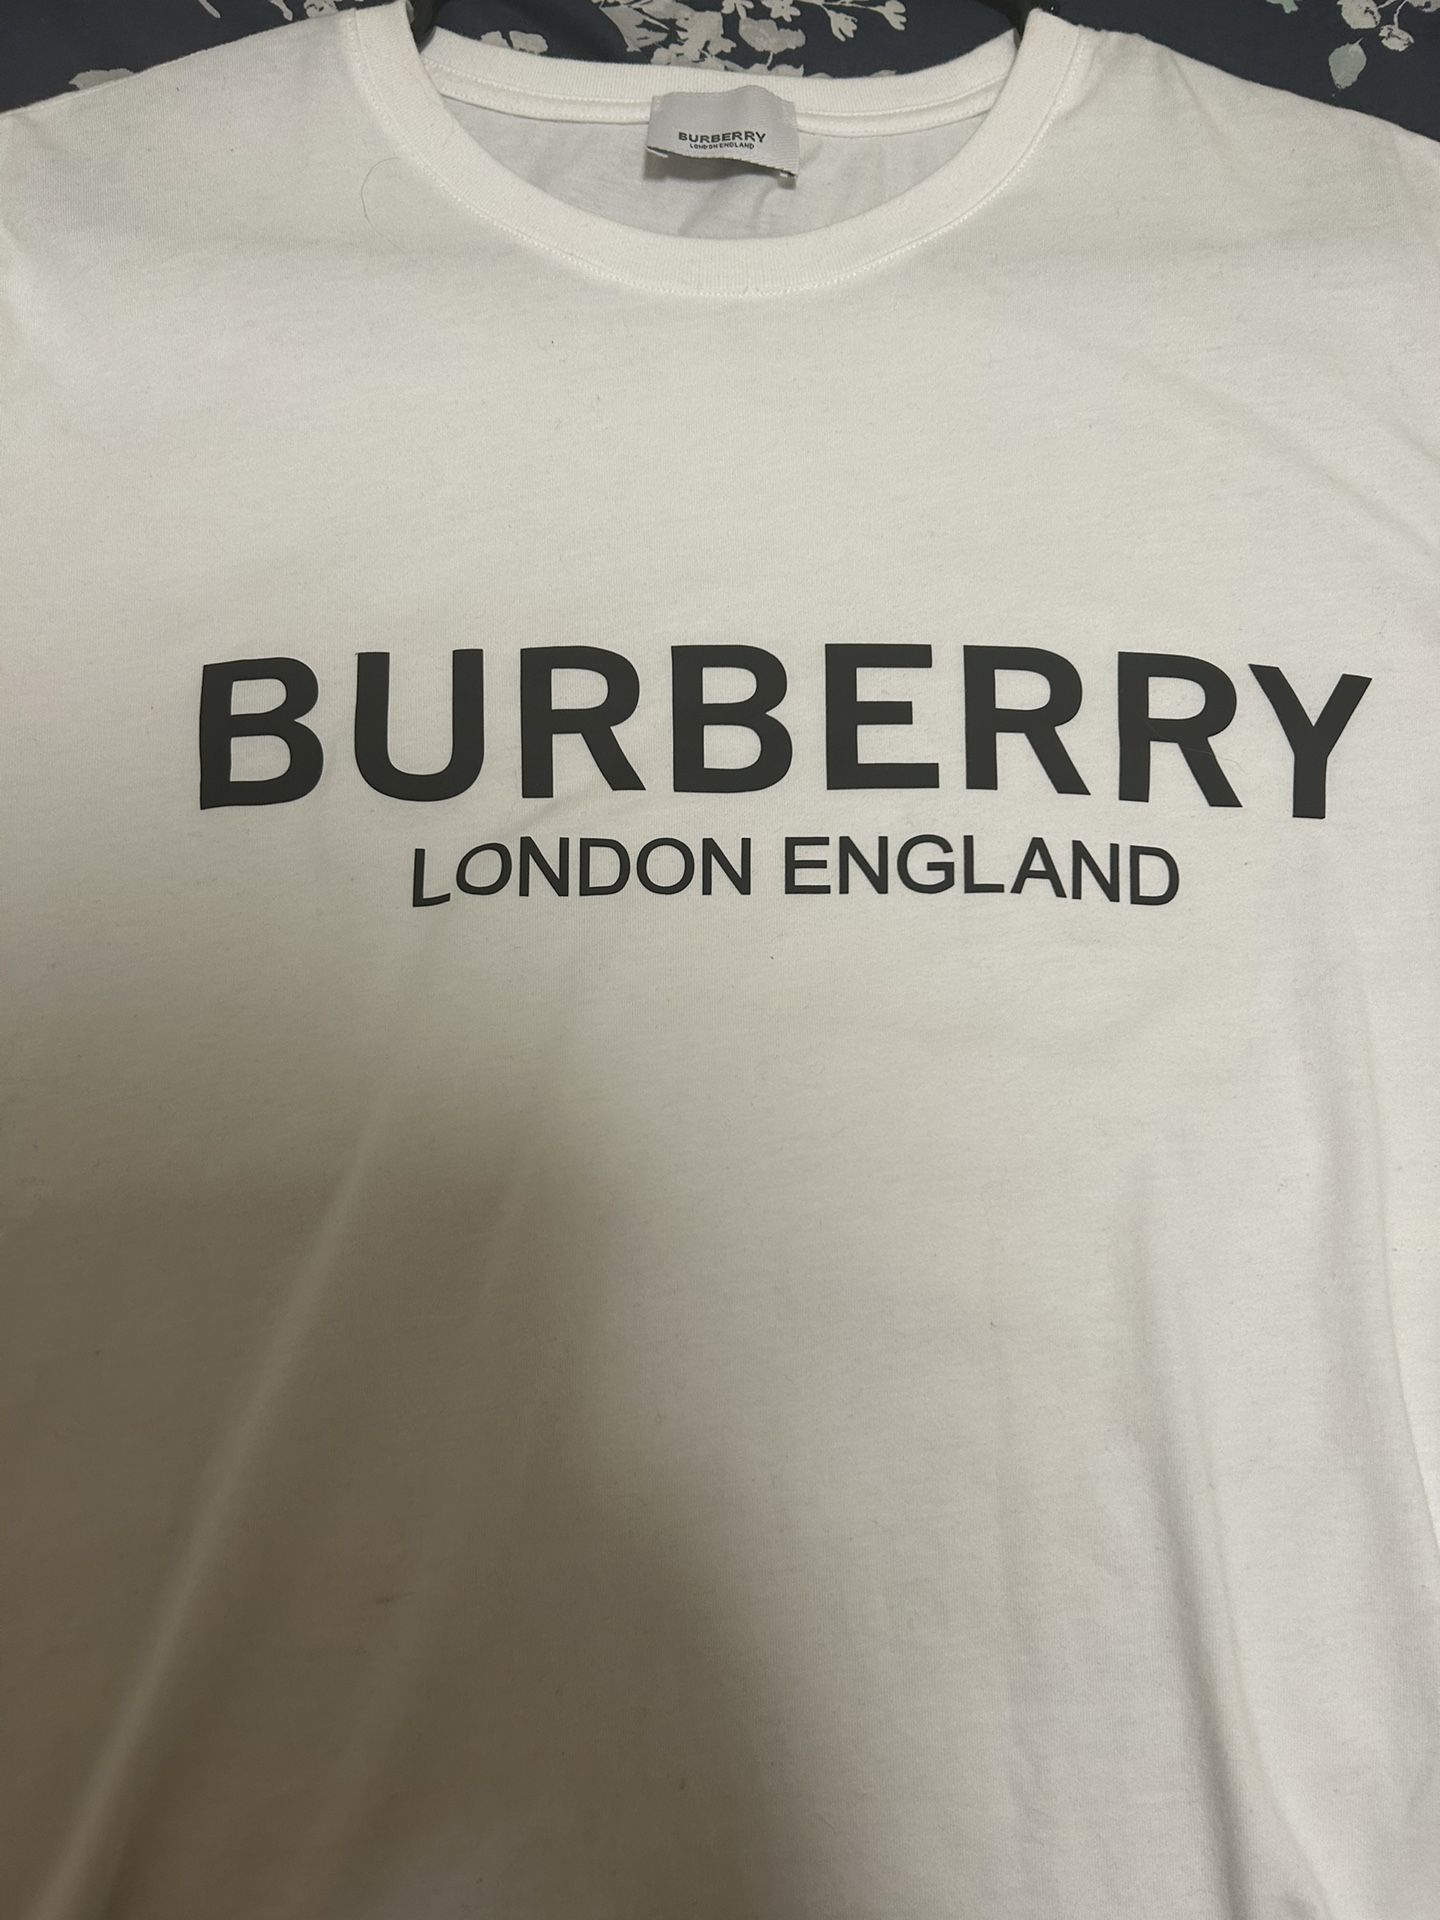 burberry shirt size small 